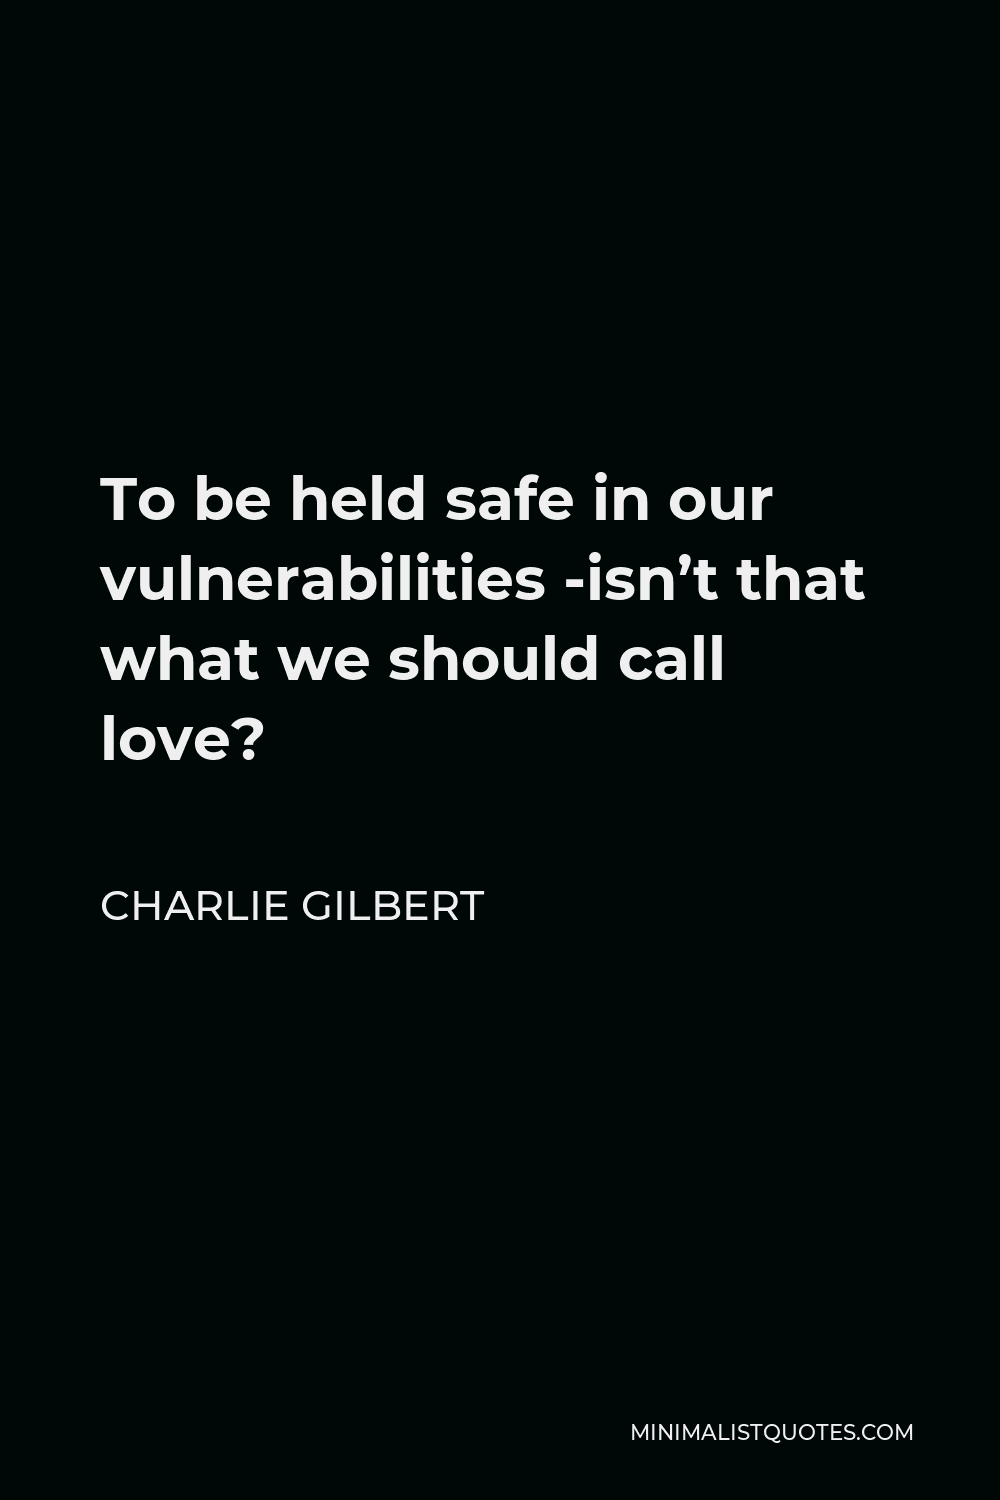 Charlie Gilbert Quote - To be held safe in our vulnerabilities -isn’t that what we should call love?